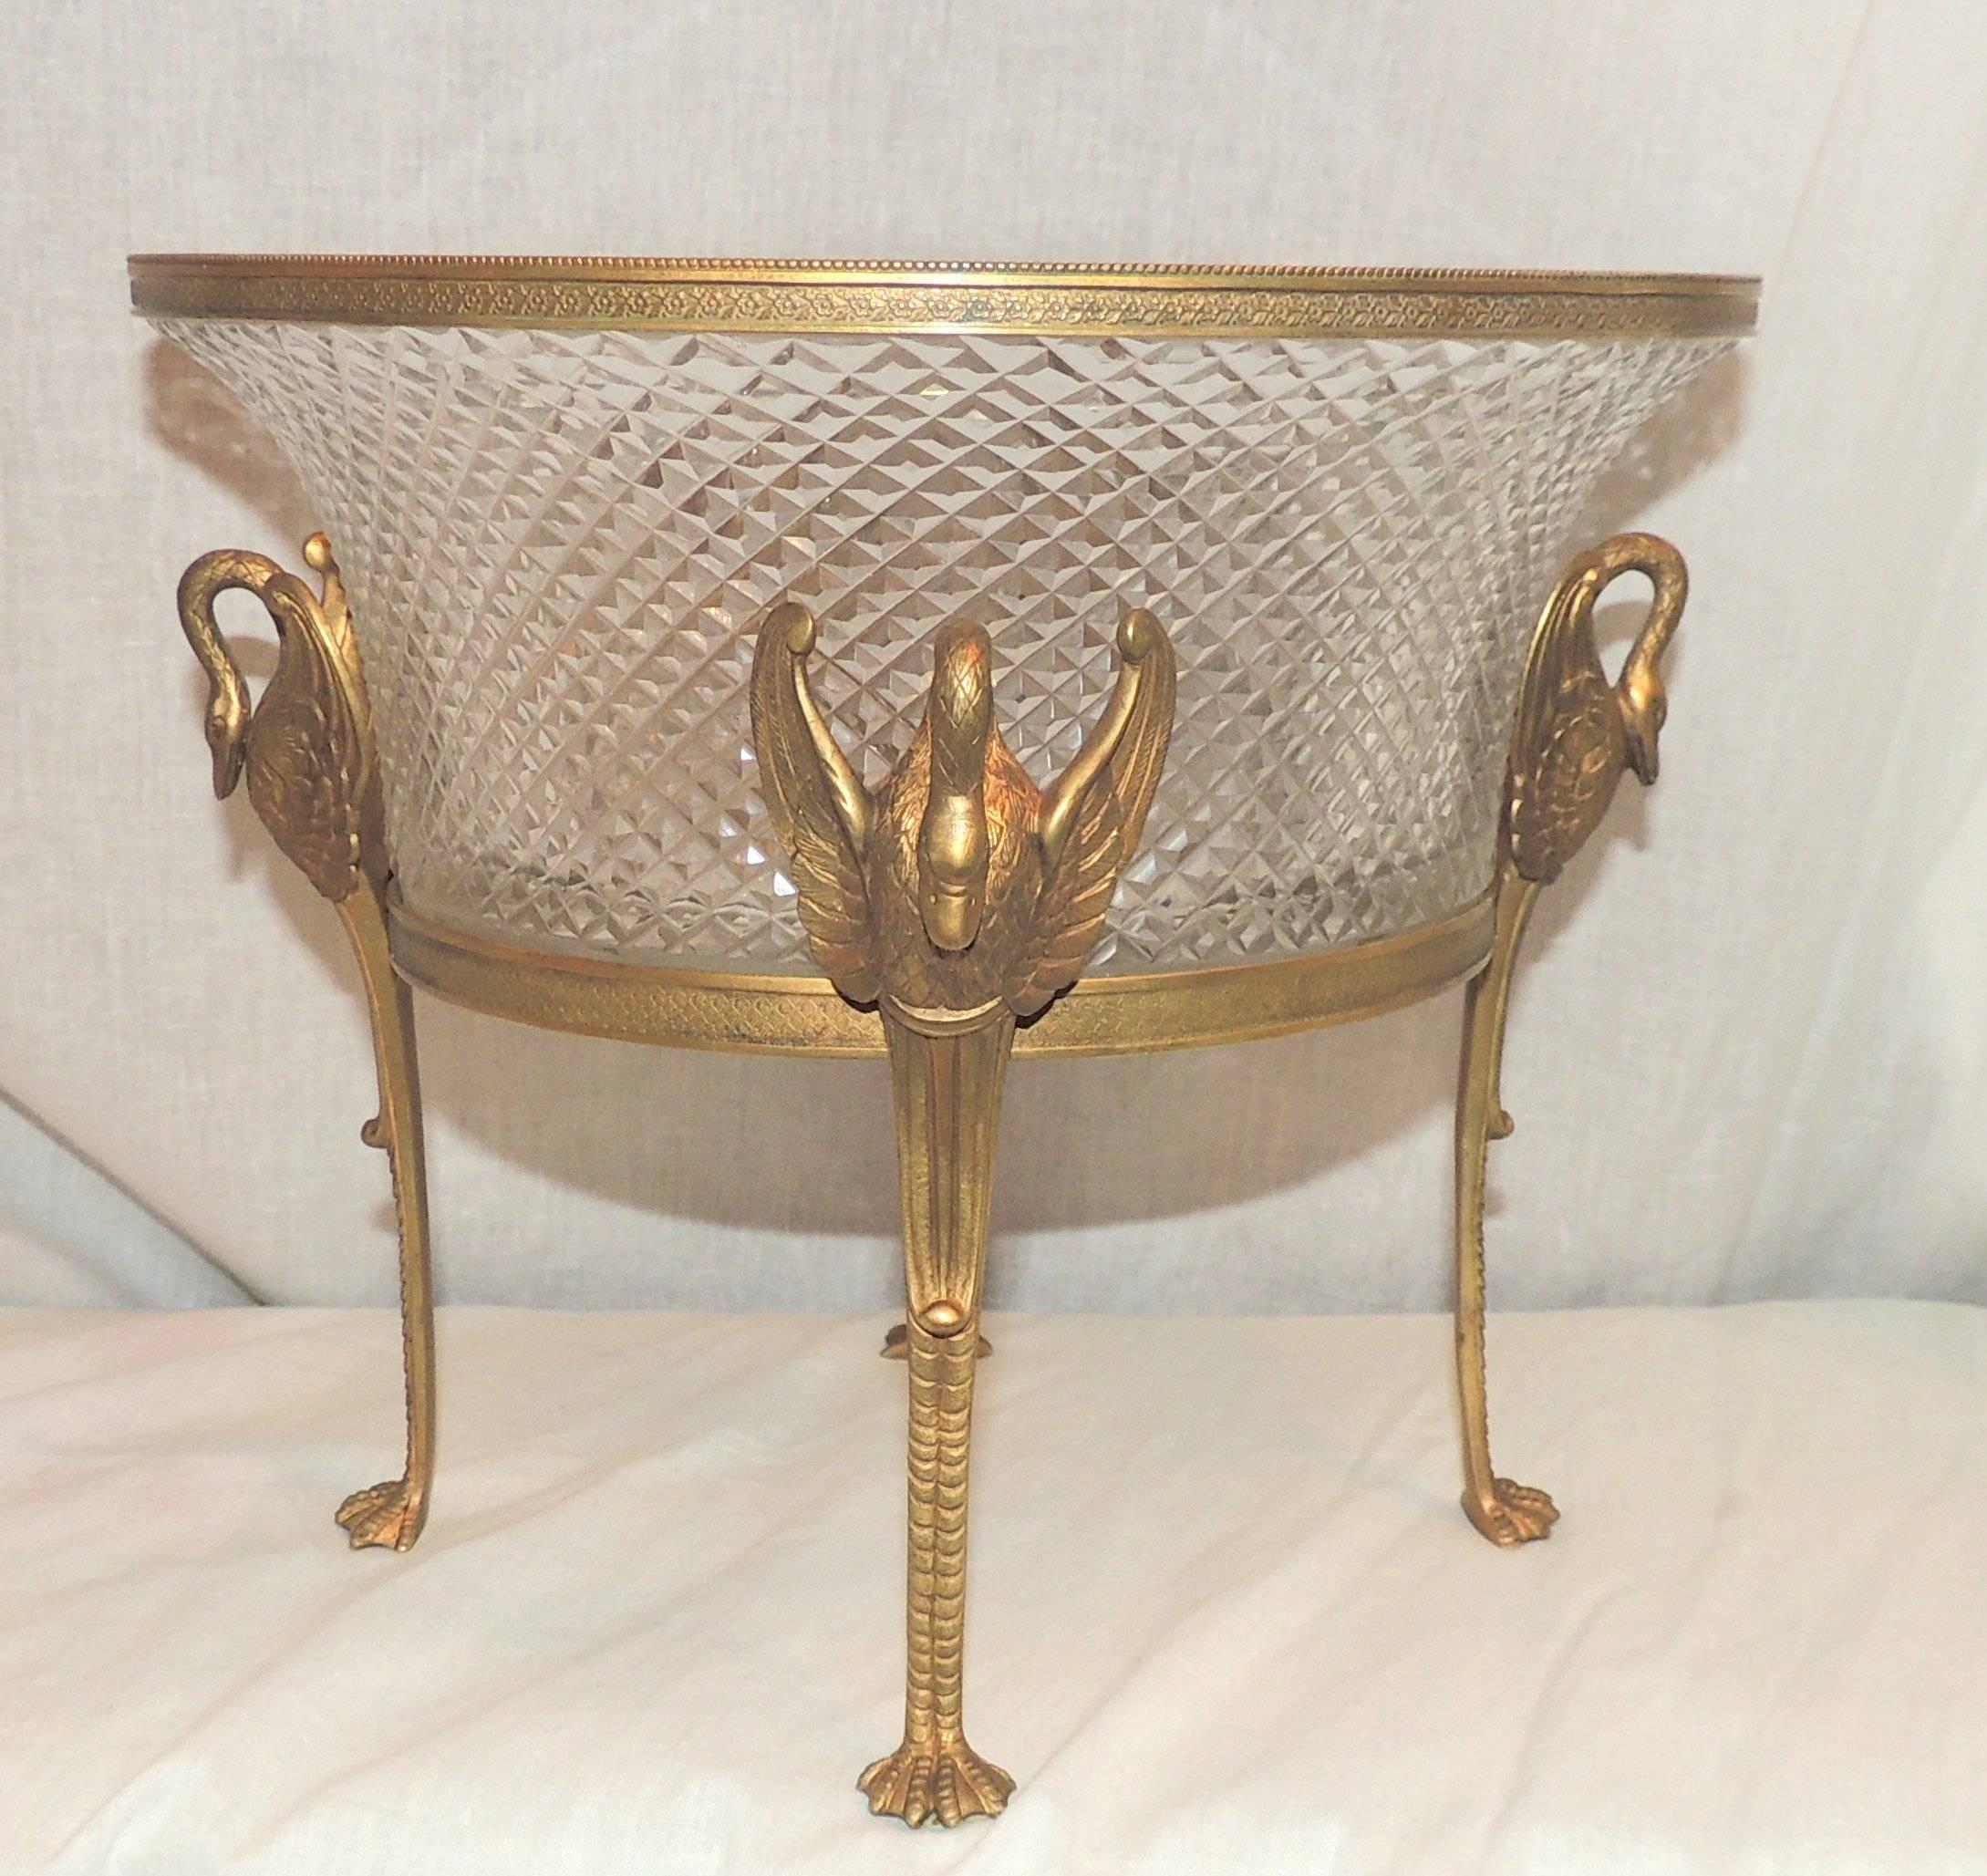 Wonderful French Dore Bronze Swan Ormolu Mounted Centerpiece With Cut Crystal Insert. 

Measures: 10" W x 9" H.